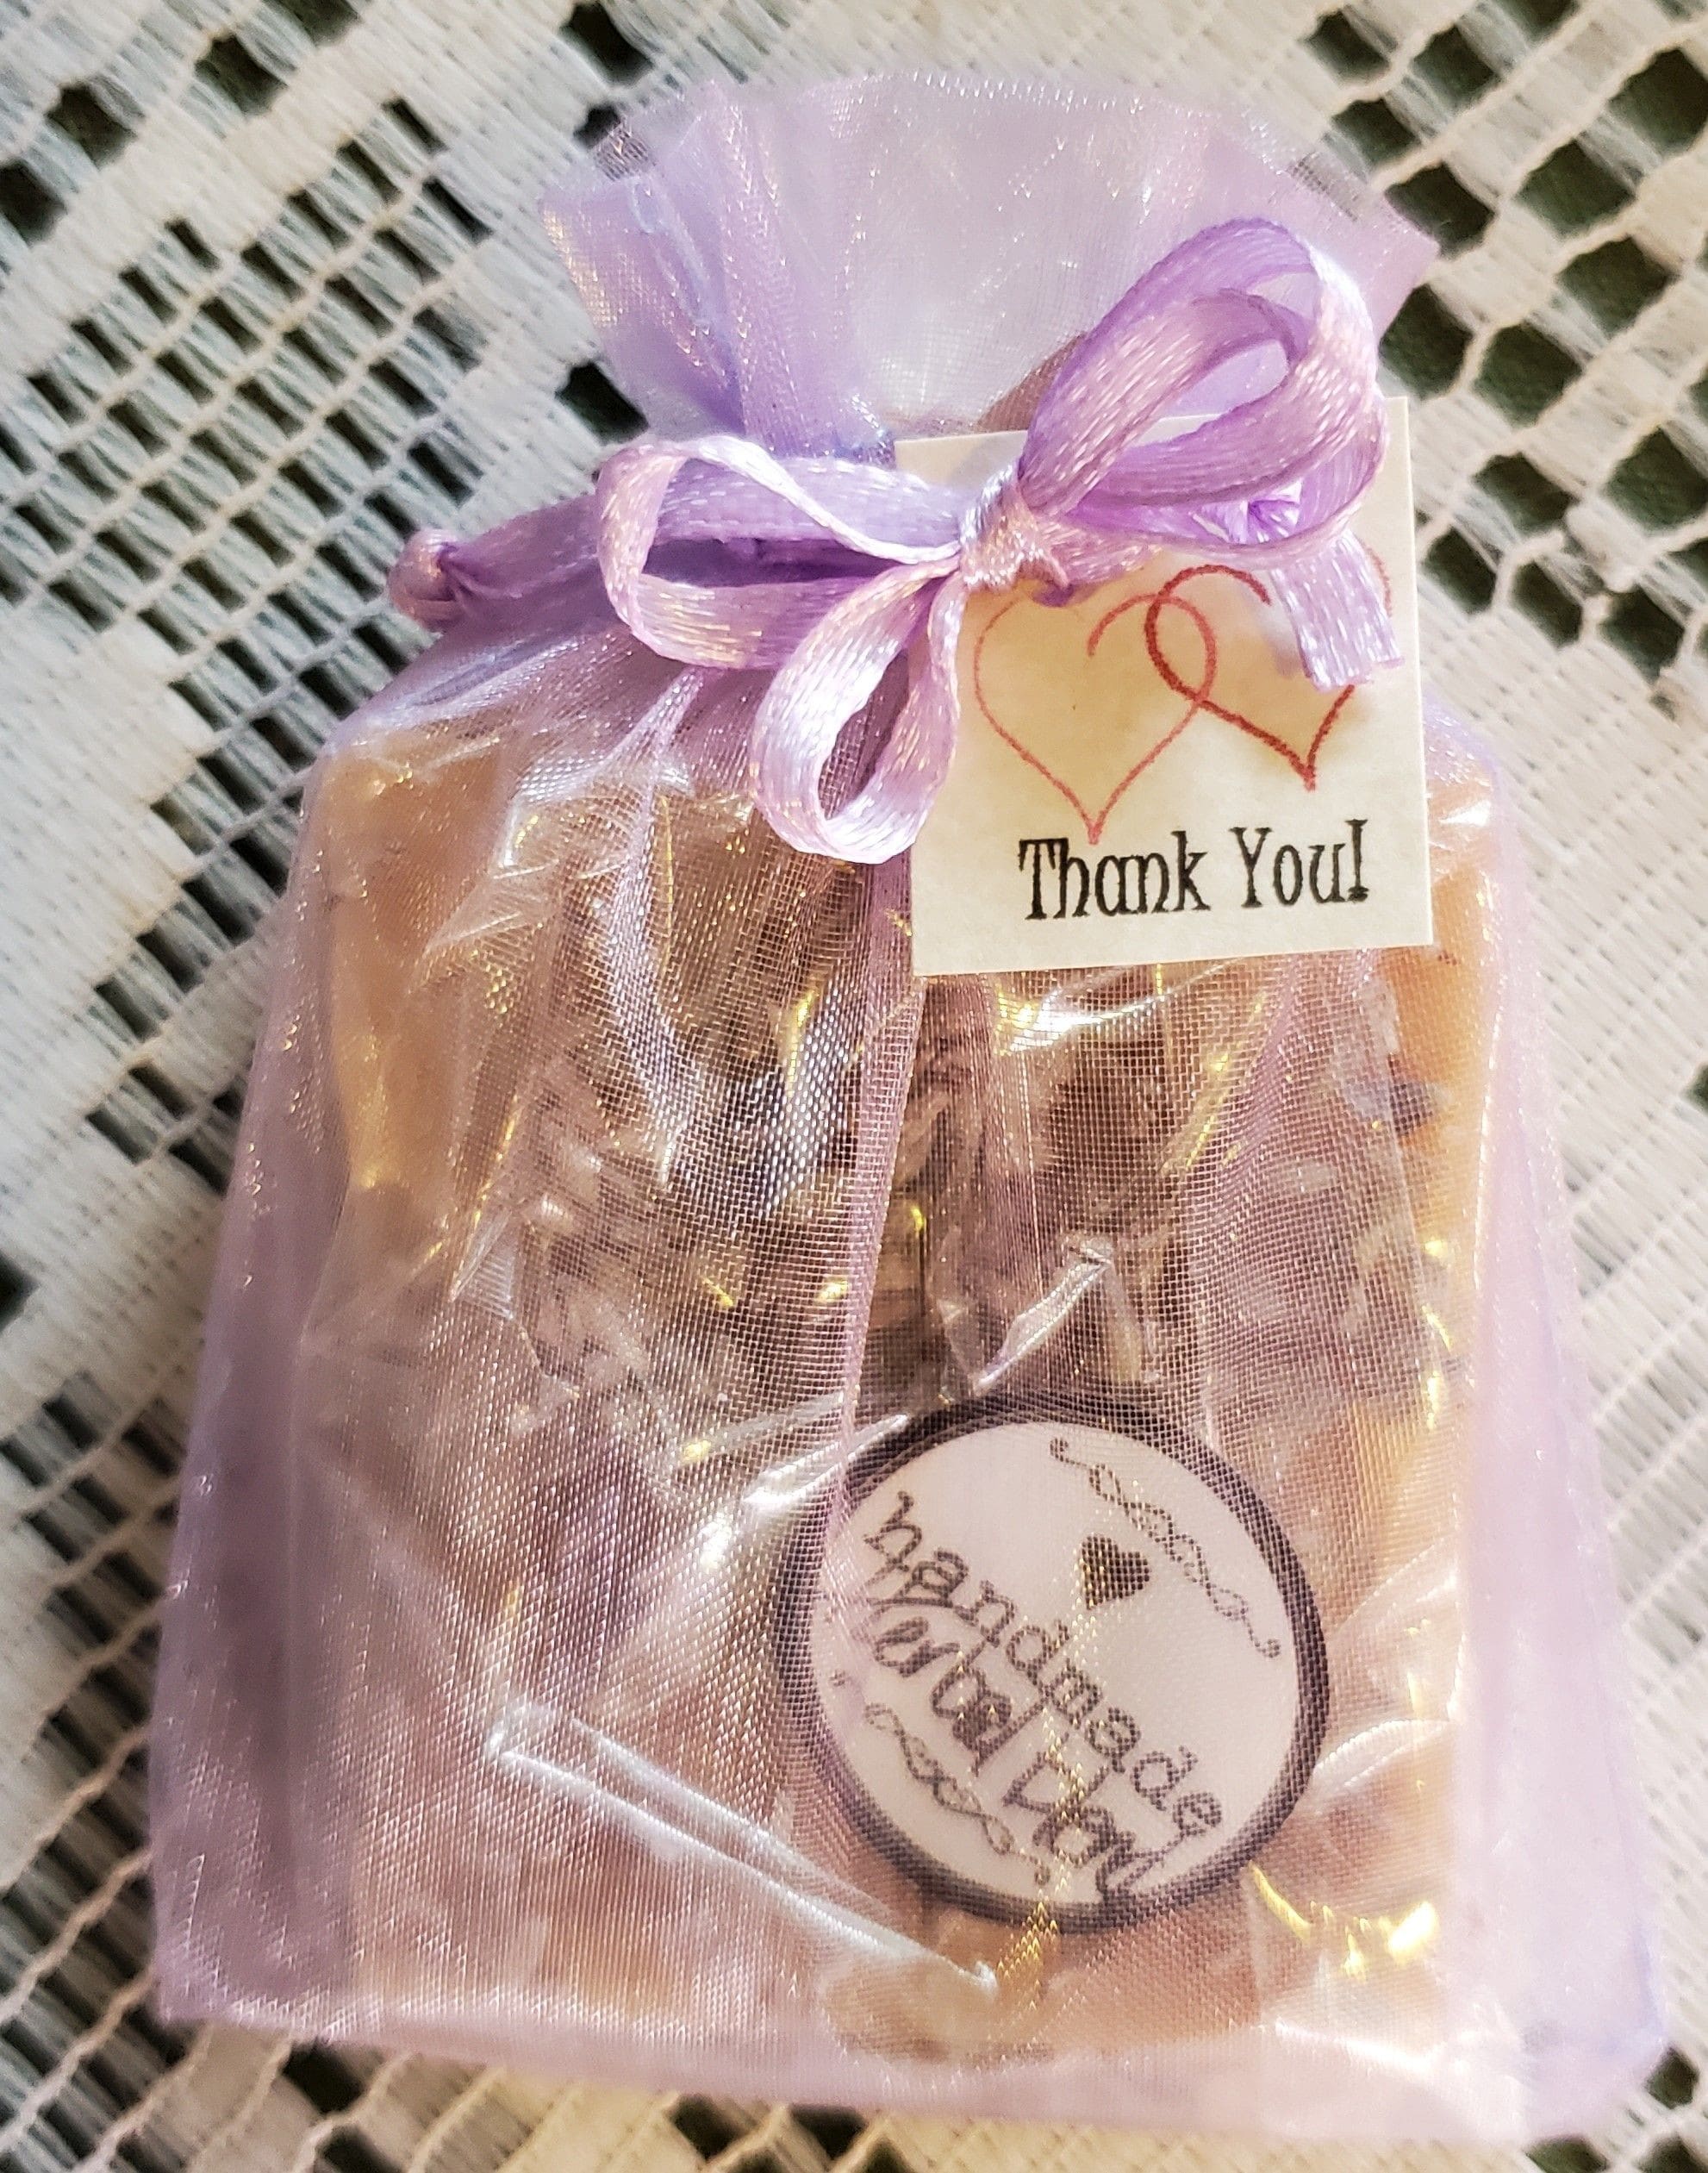 Our quality soap favours make that perfect guest favour gift that you will be proud to give! Made in Canada with no chemicals directing a percentage to charity.